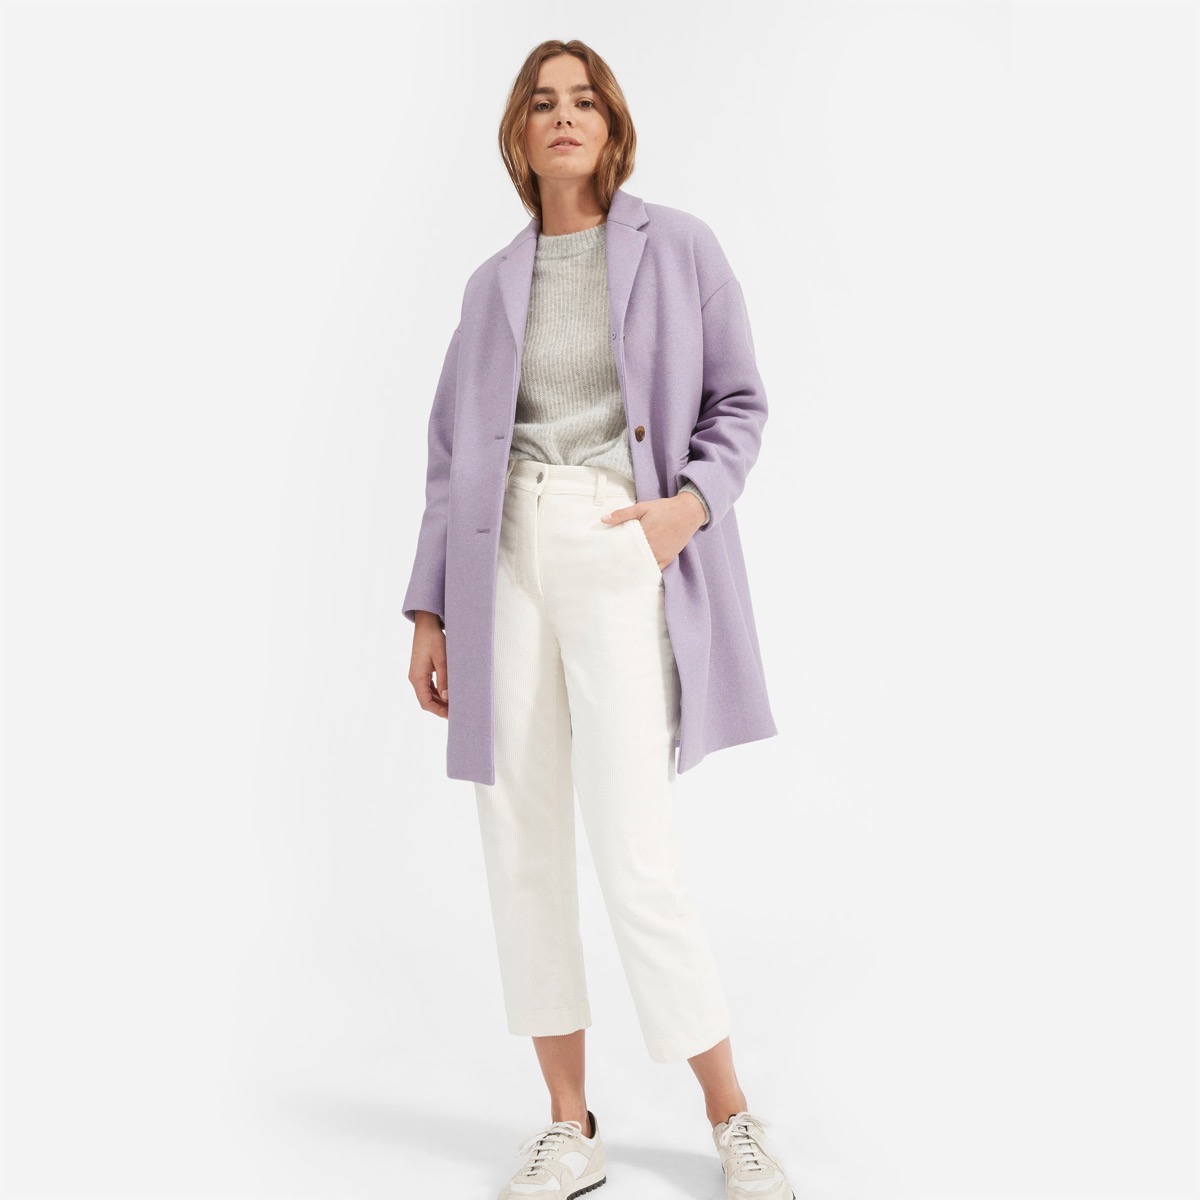 white woman in white pants and purple sweater